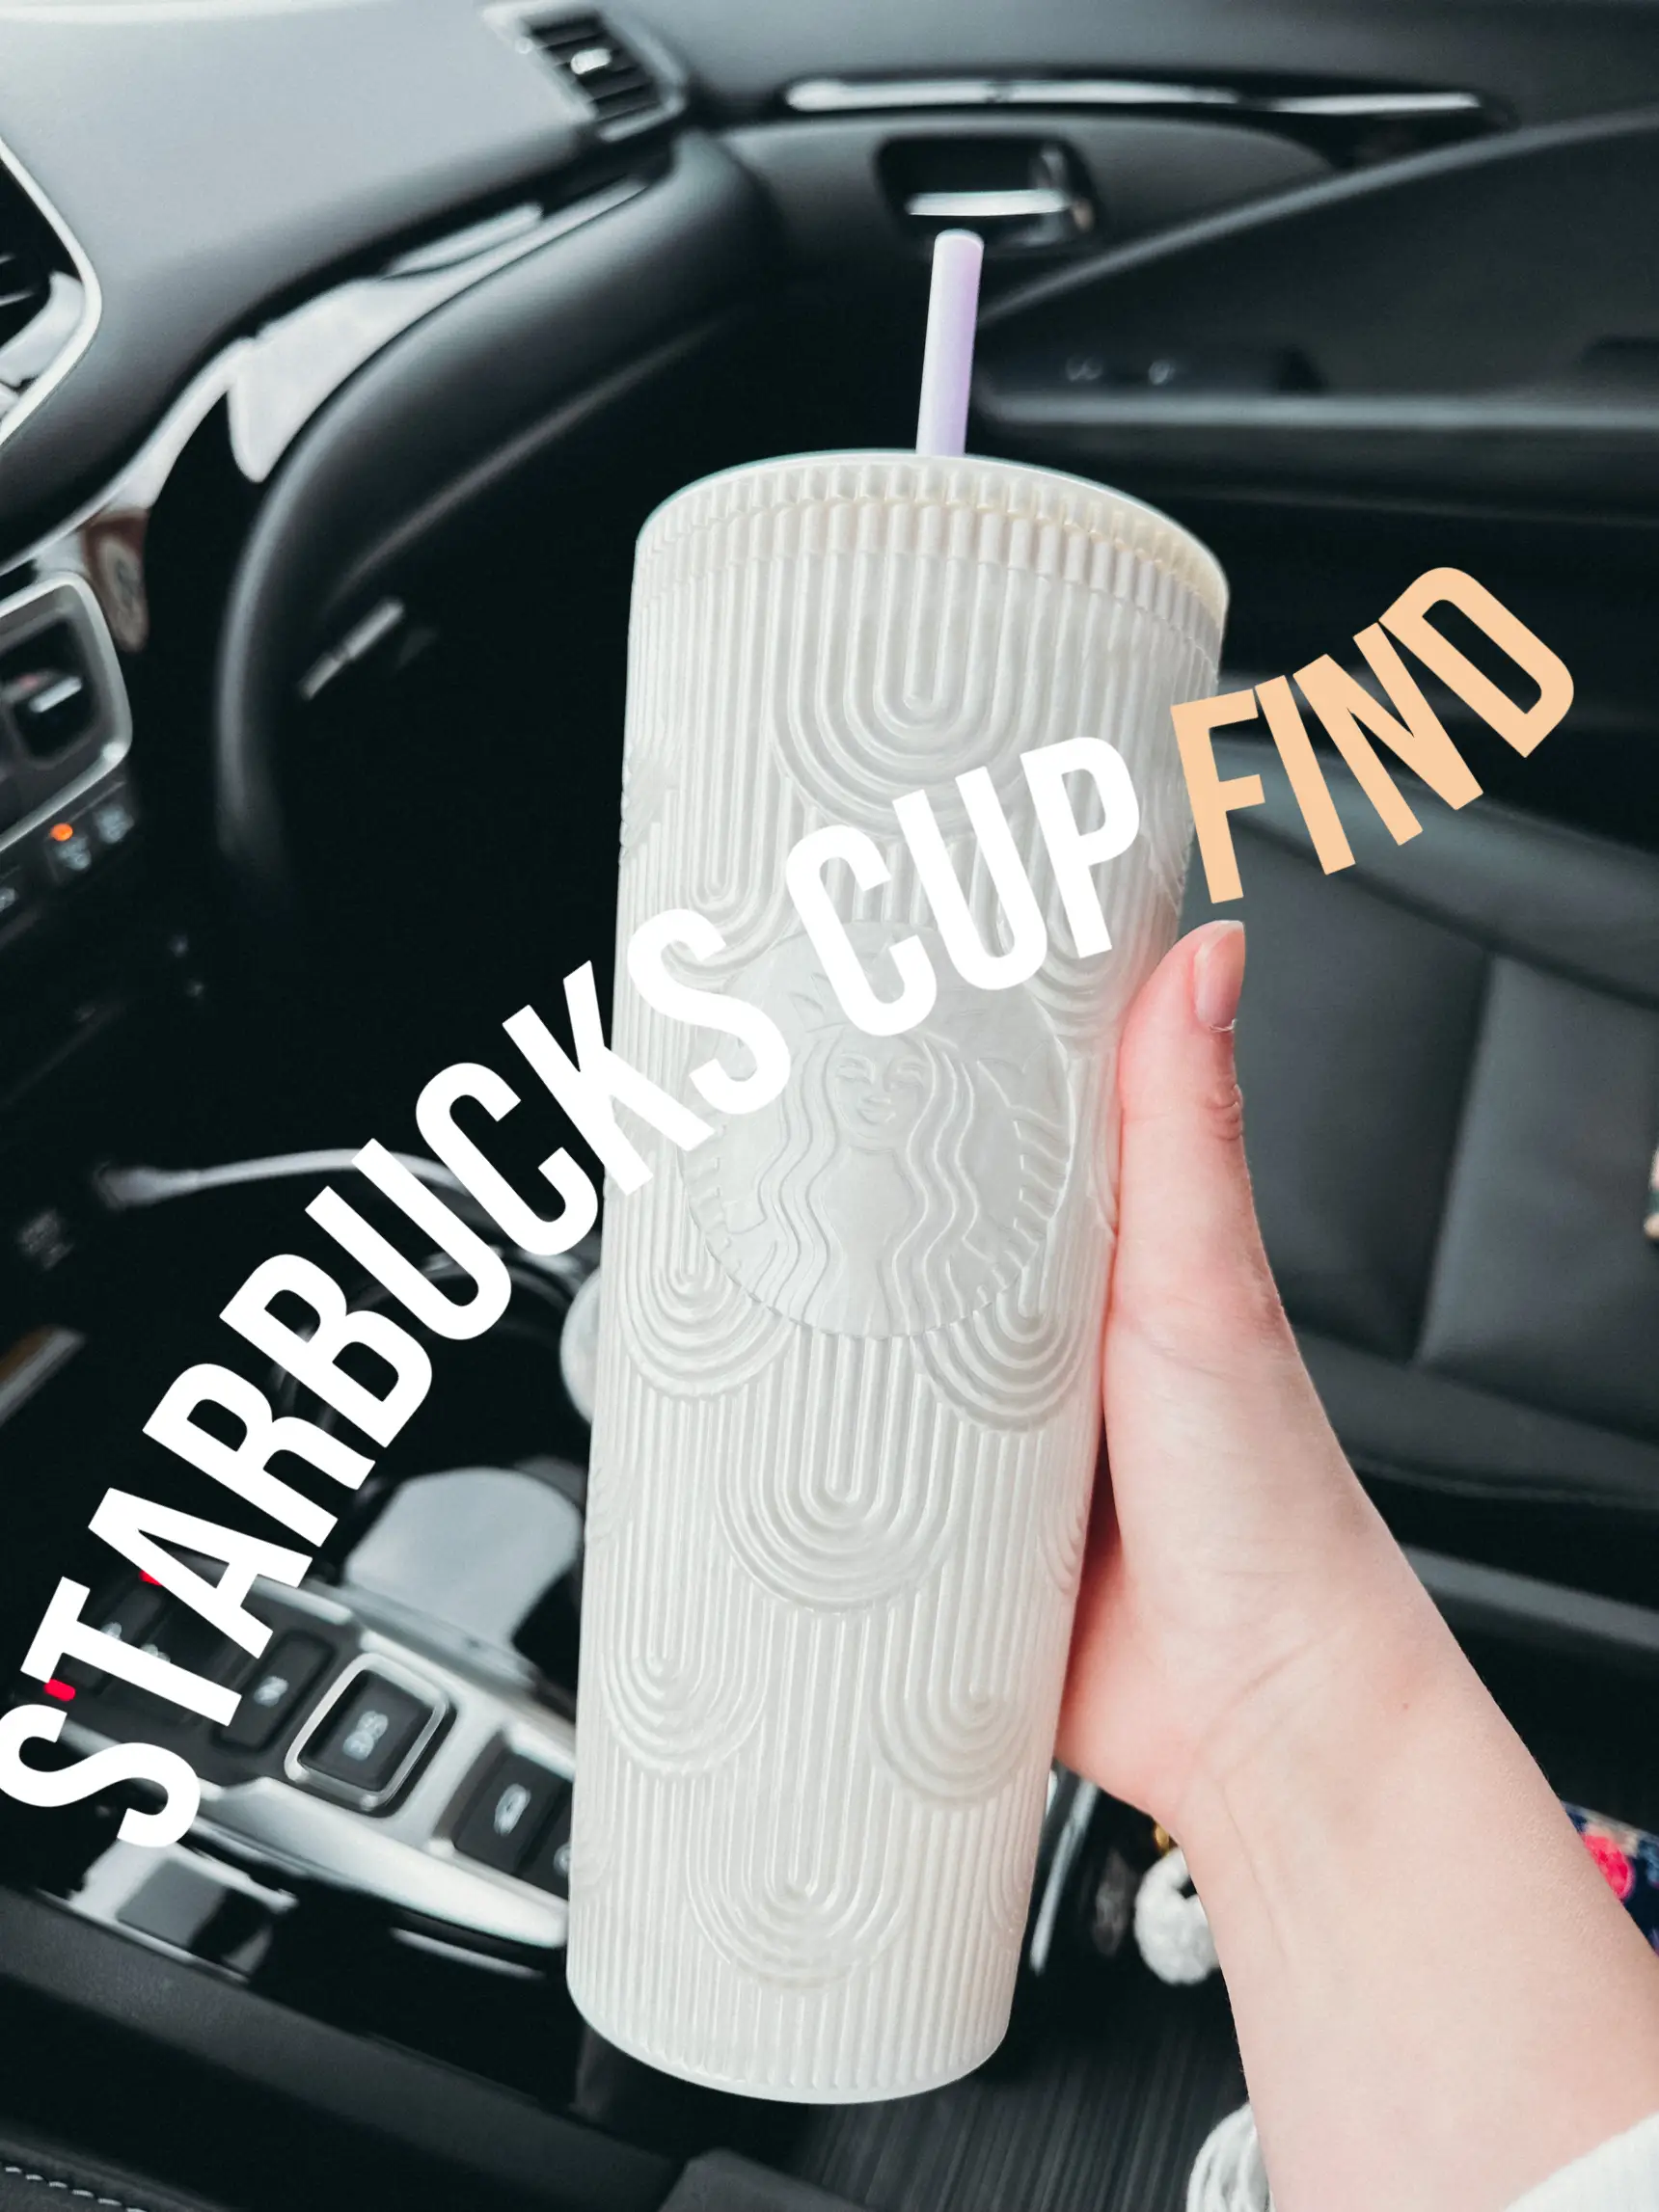 We found the Starbucks x Stanley tumbler IN STOCK today! This cherry-r, starbucks stanley cup